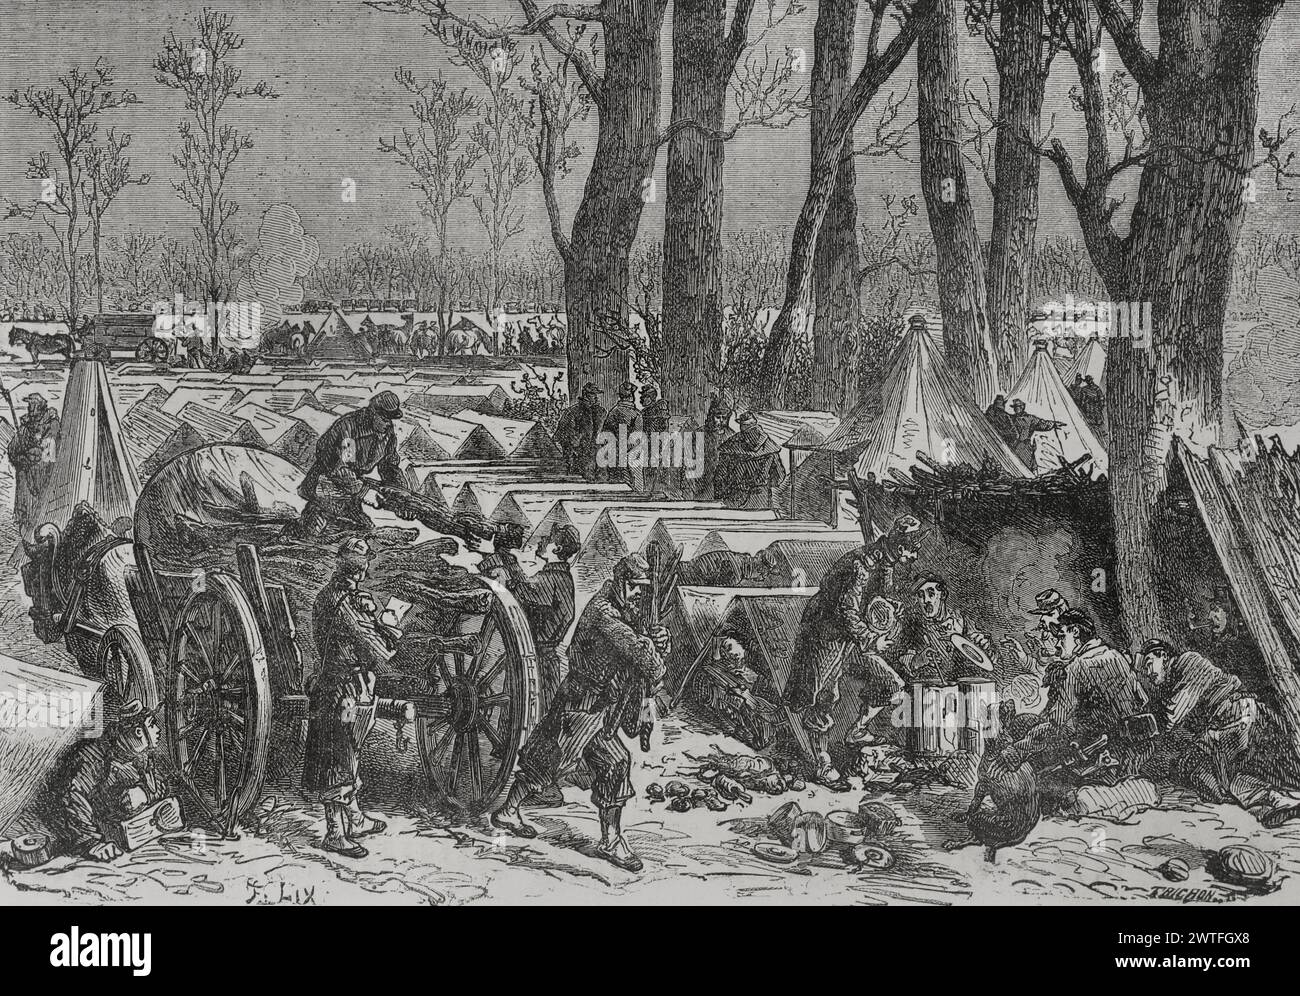 Franco-Prussian War (1870-1871). Siege of Paris (19 September 1870 to 28 January 1871). Bivouac of General Ducrot's troops in the wood of Vincennes. Engraving by Trichon. 'Historia de la Guerra de Francia y Prusia' (History of the War between France and Prussia). Volume II. Published in Barcelona, 1871. Author: Auguste Trichon (1814-1898). French engraver. Stock Photo